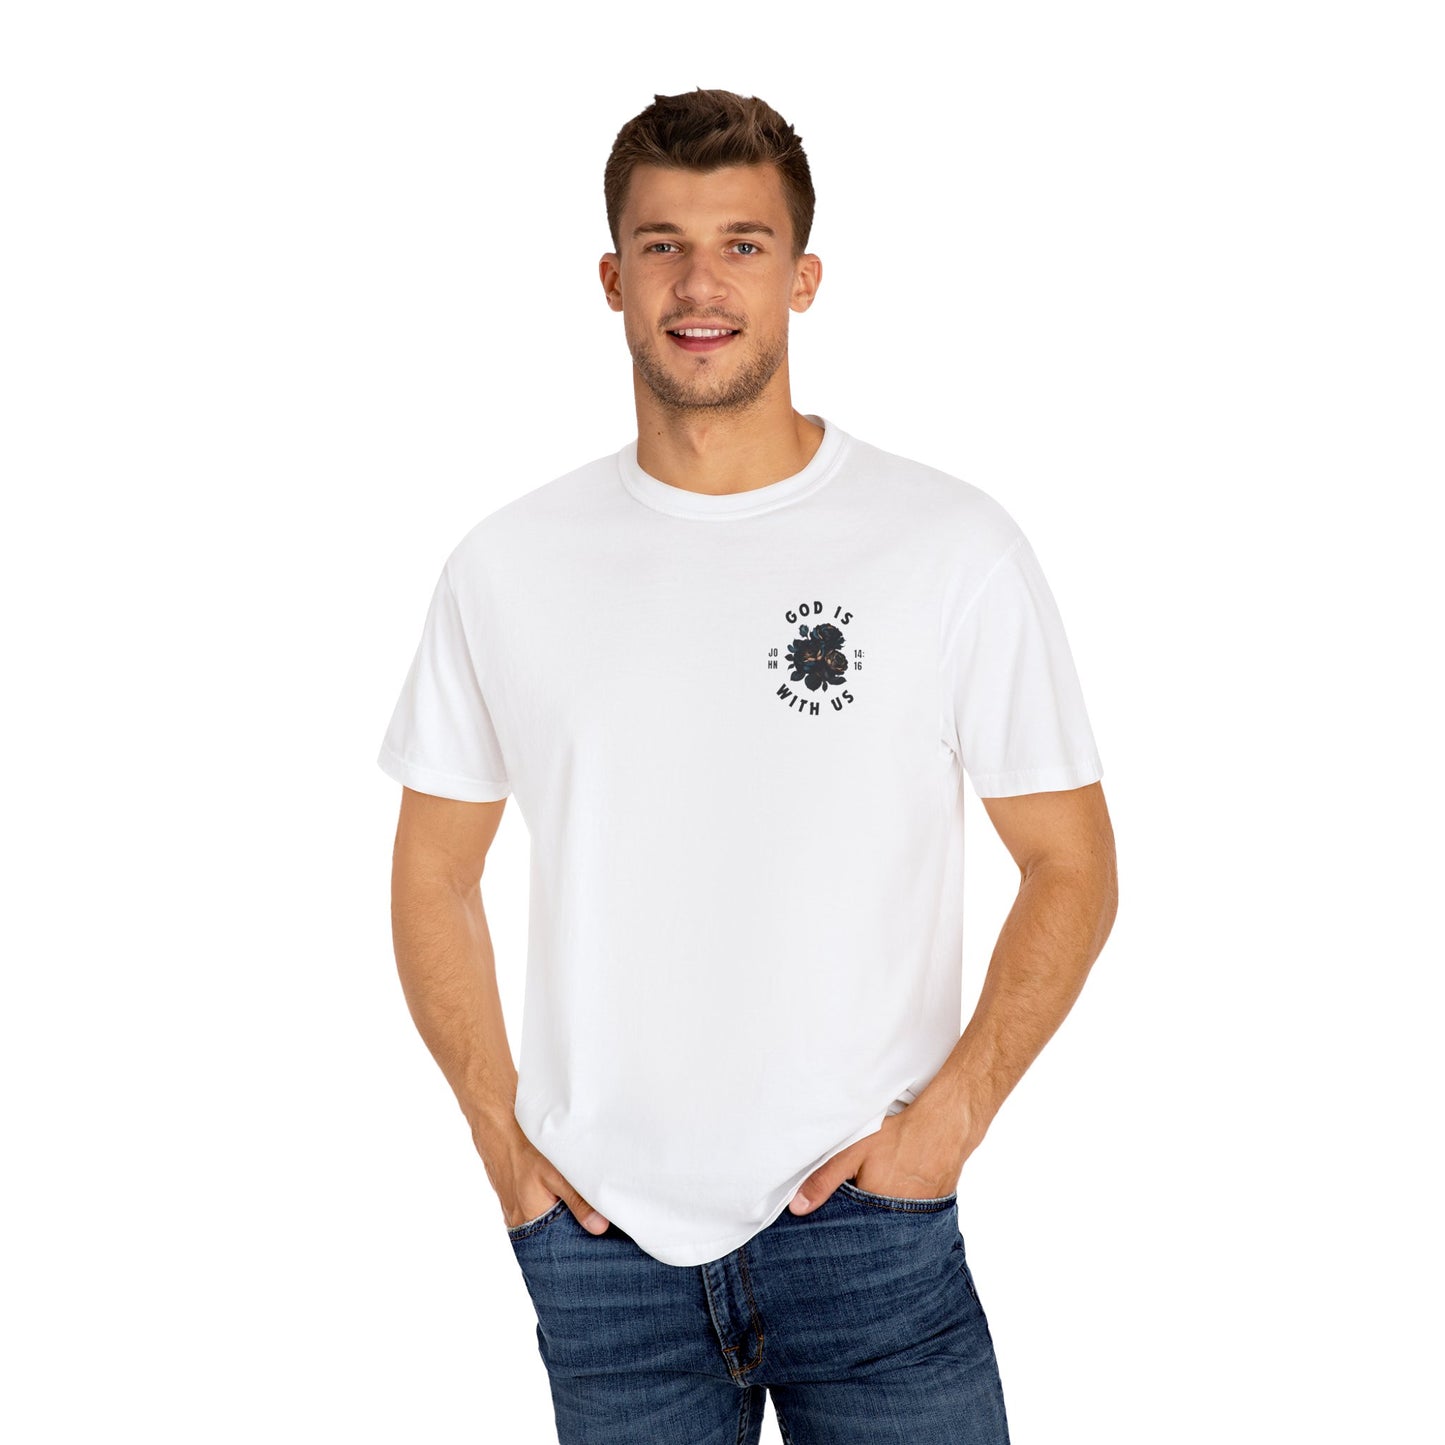 God is with Us Unisex Garment-Dyed T-shirt